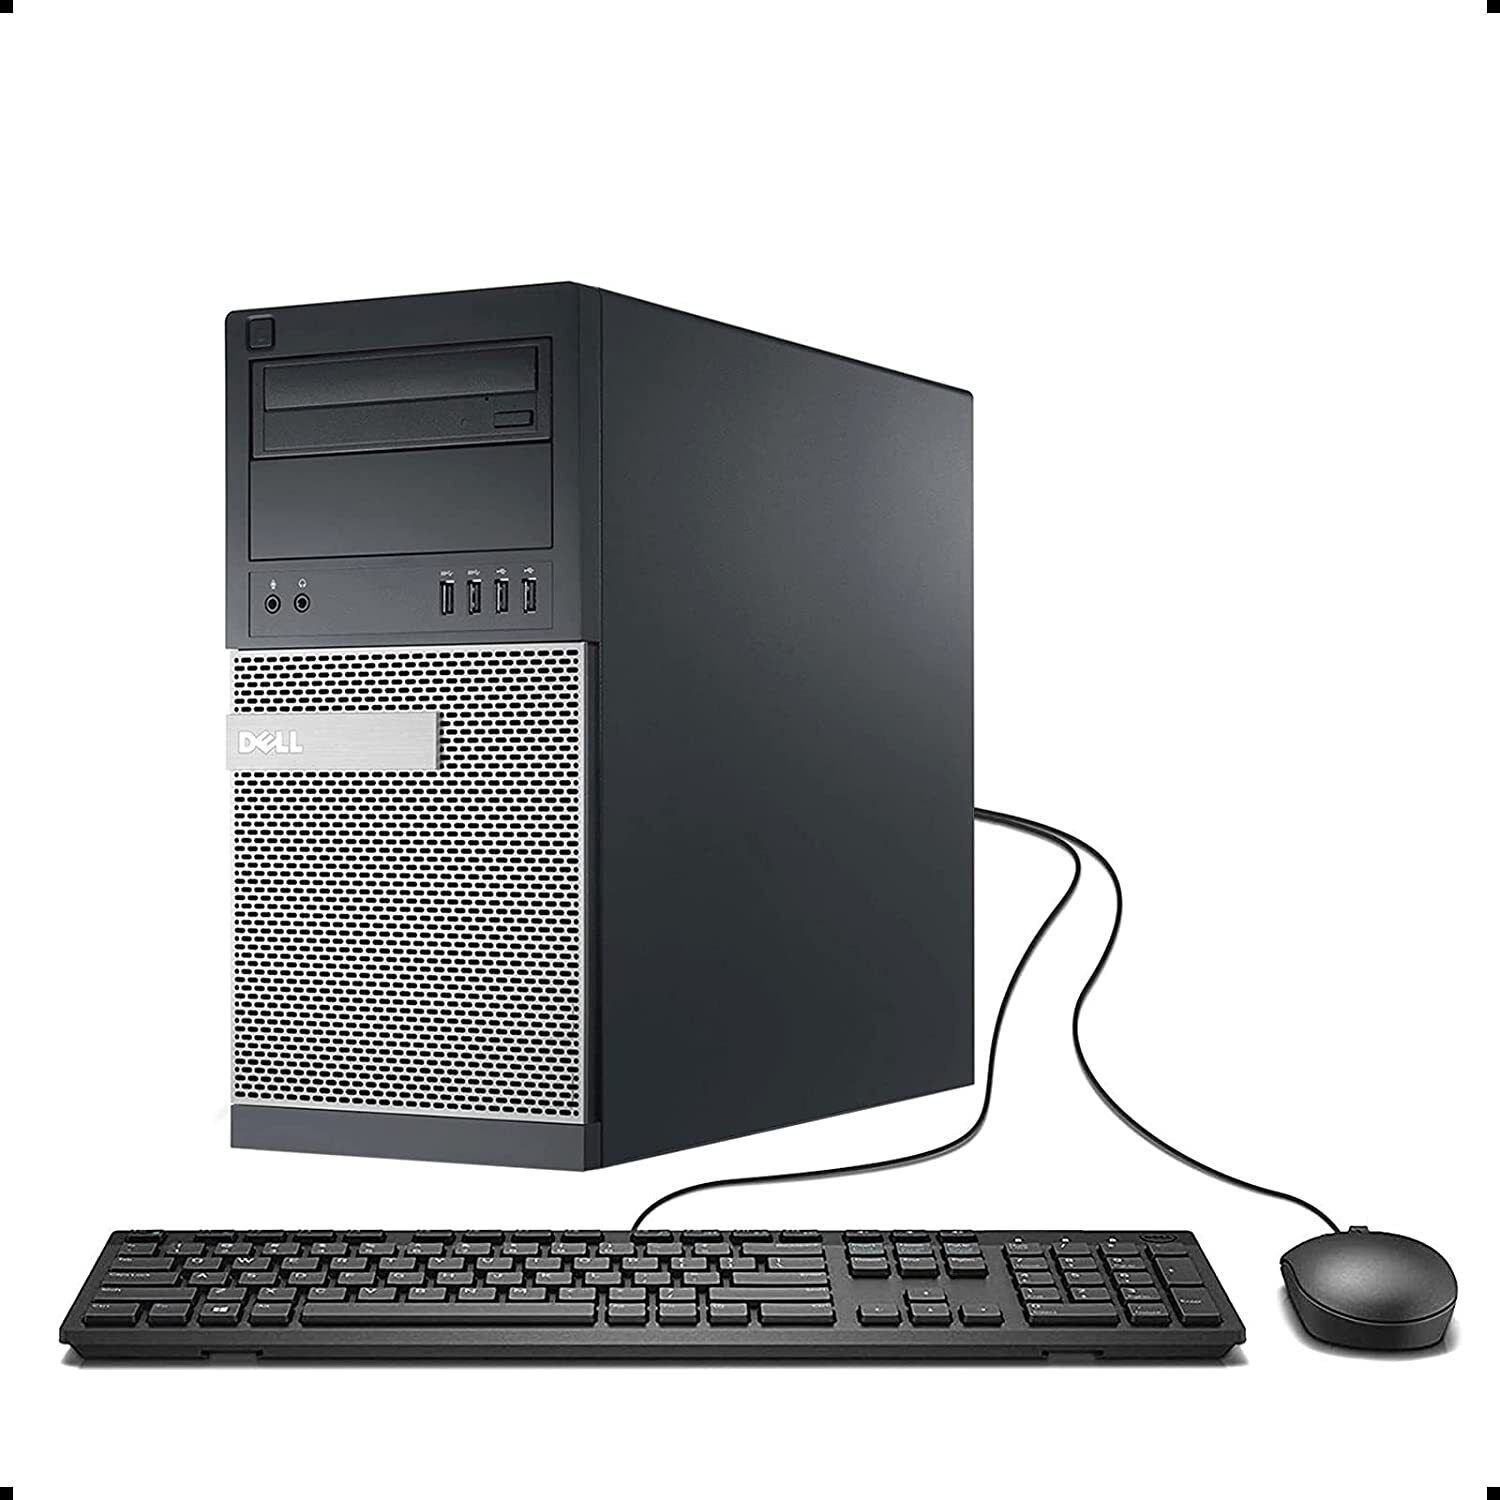 Customize Dell Optiplex 790 Tower Computer with Windows 7 Professional x64bit